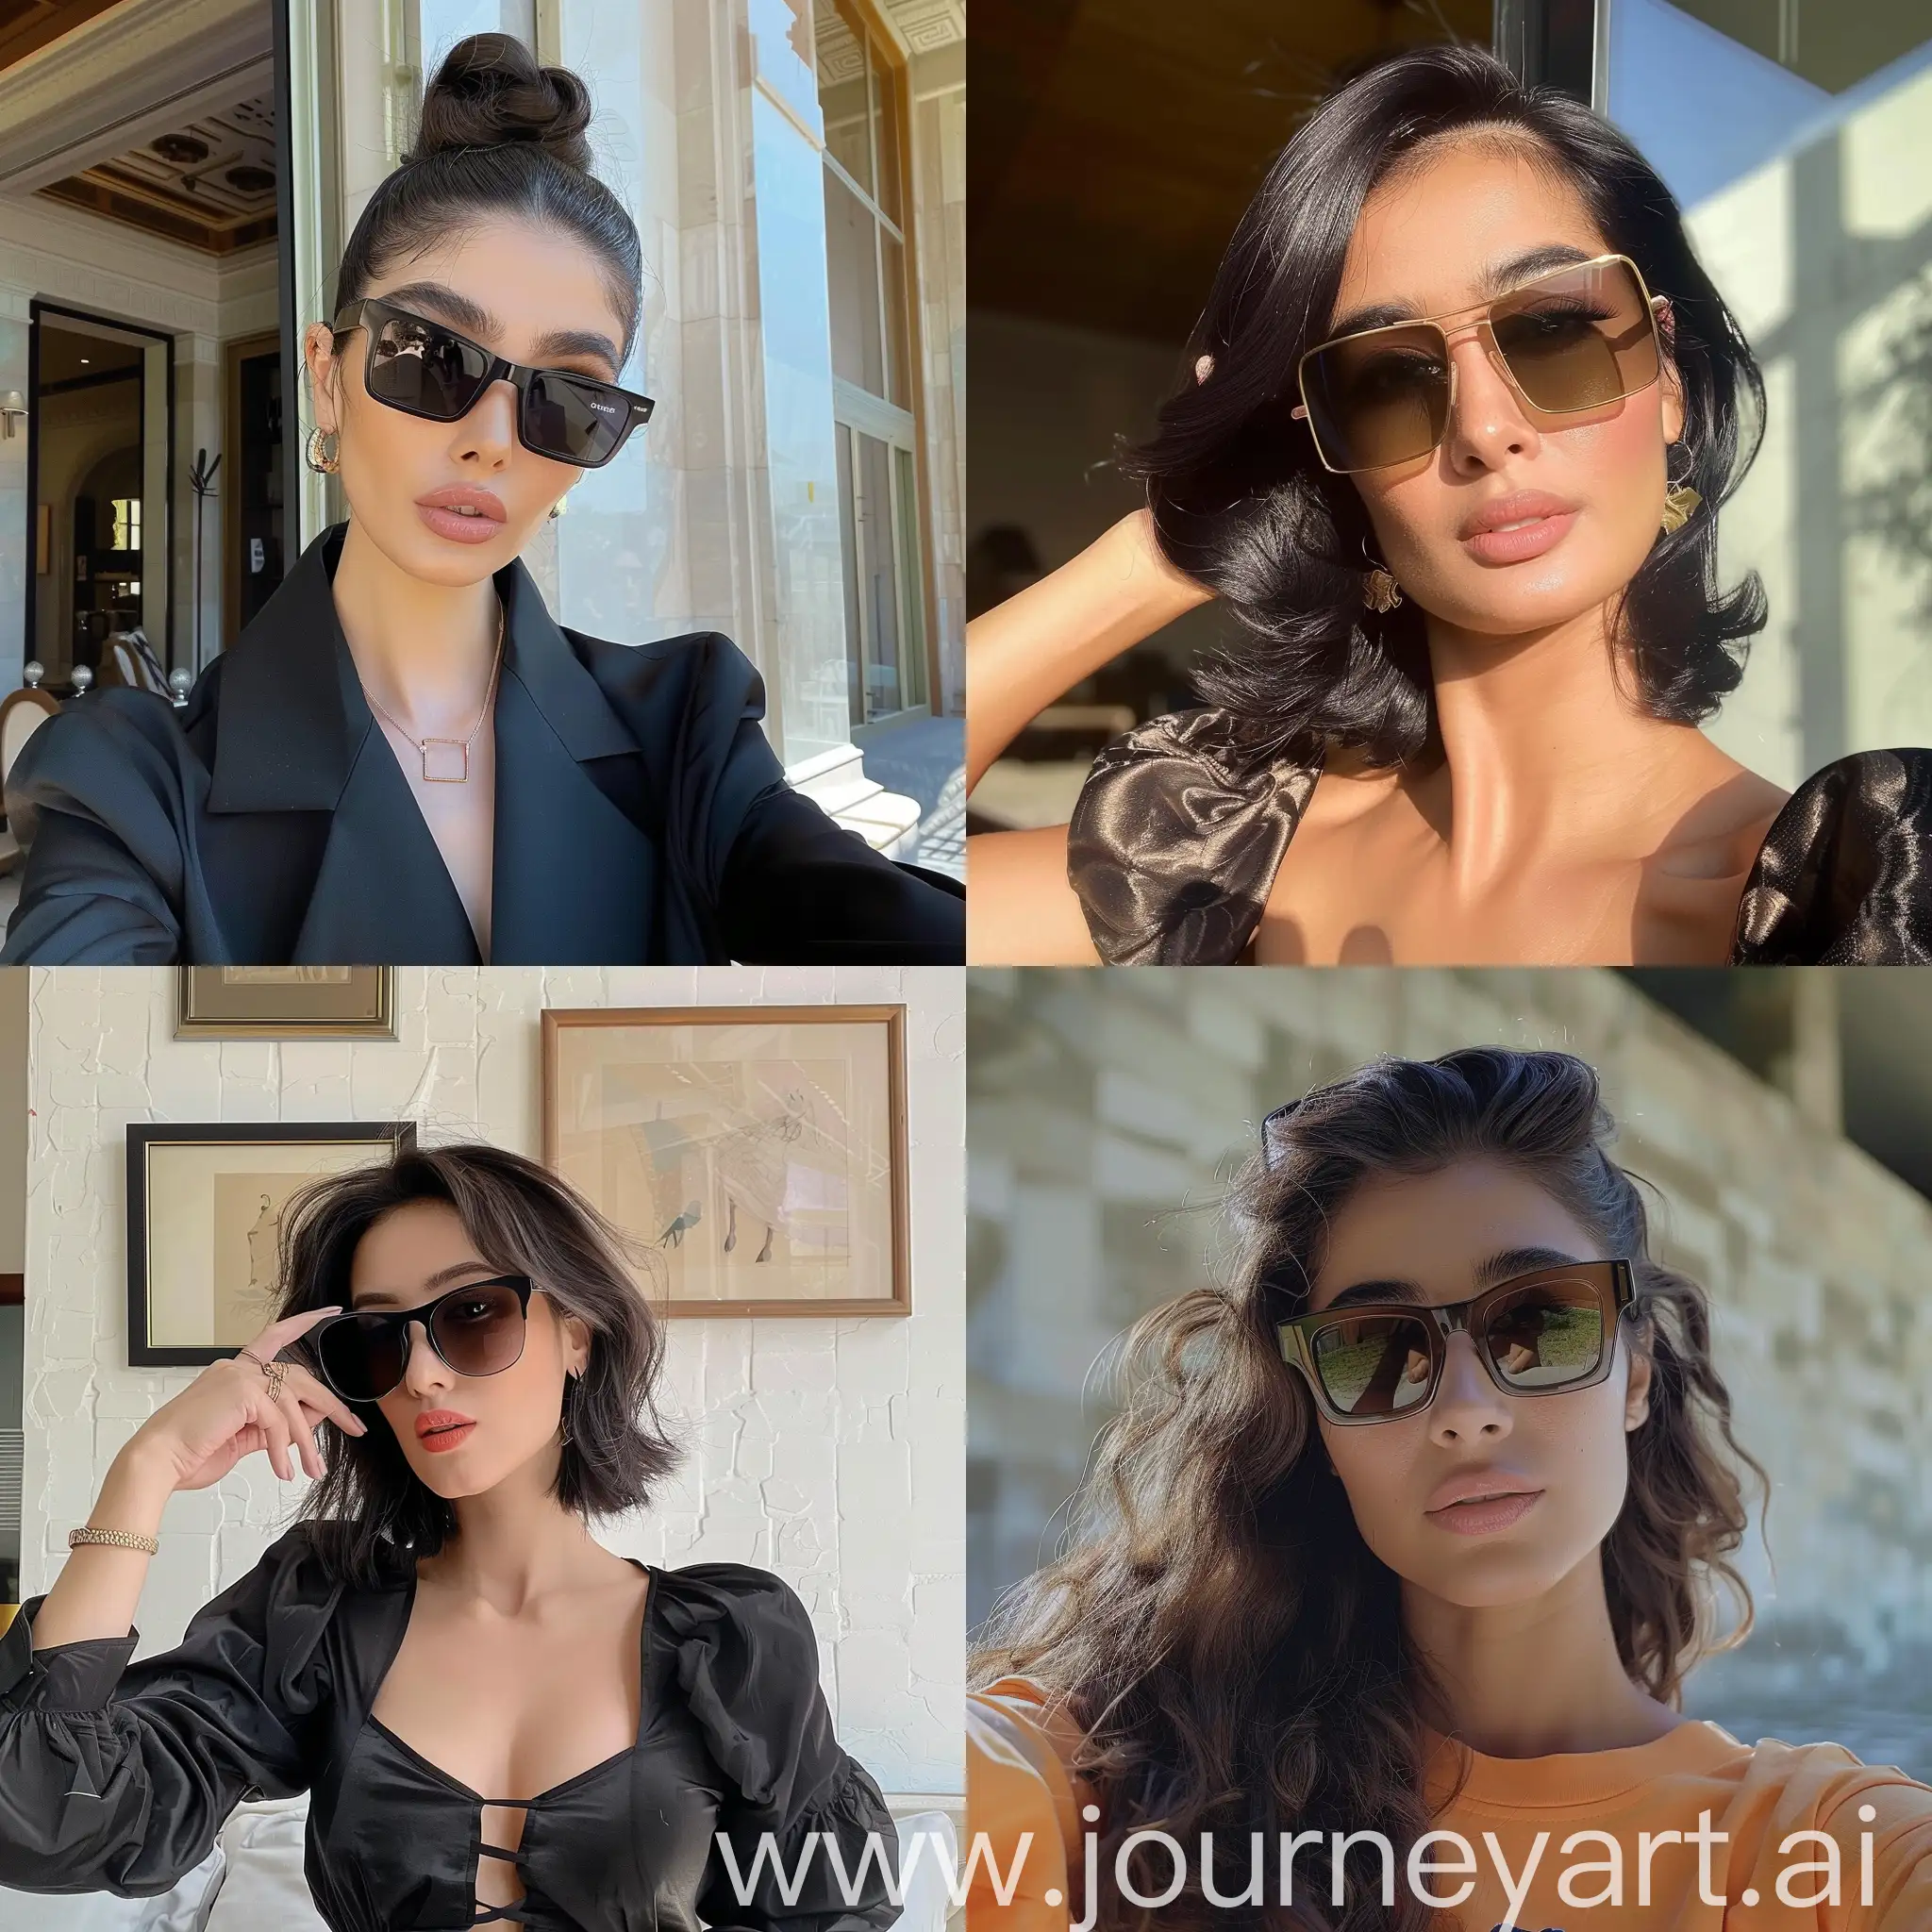 Dela Rostami with sunglass taking a selfie 